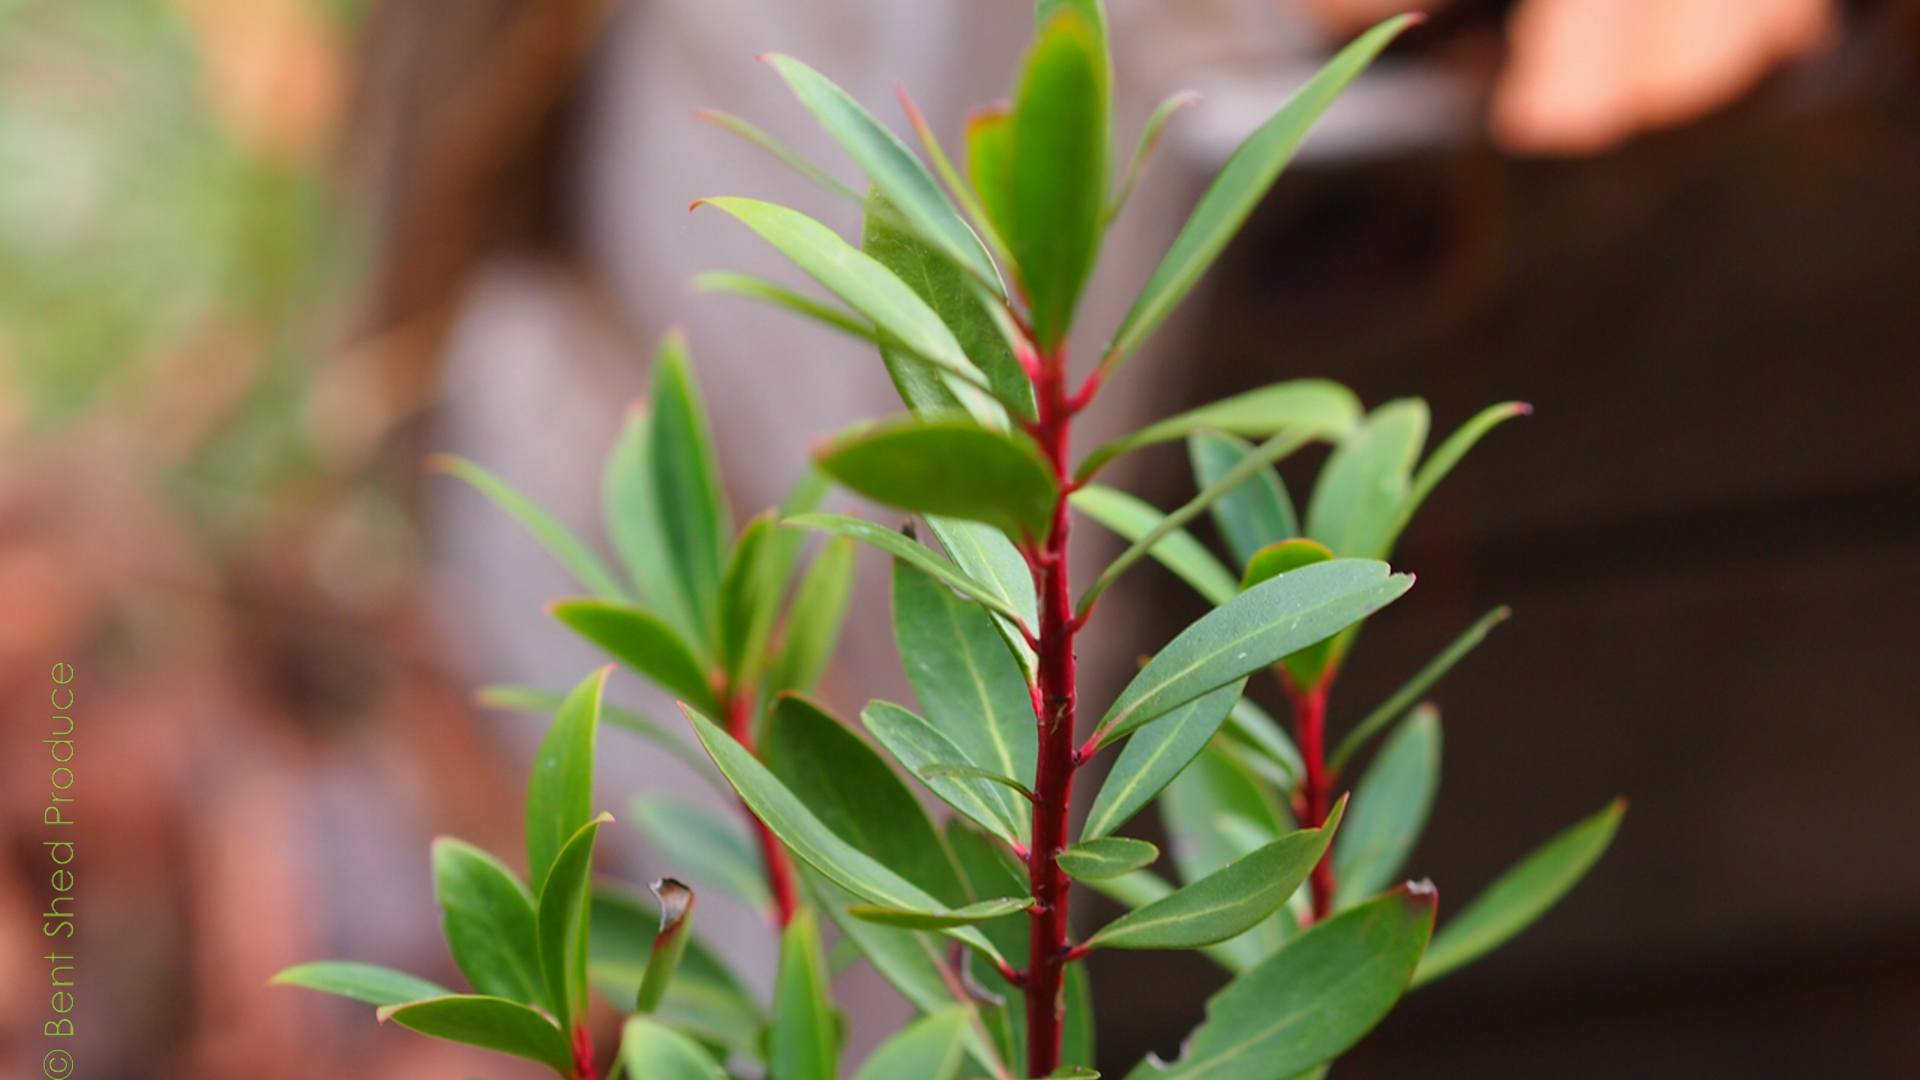 Long lance-shaped leaves come out from a central red stem of a close-up plant